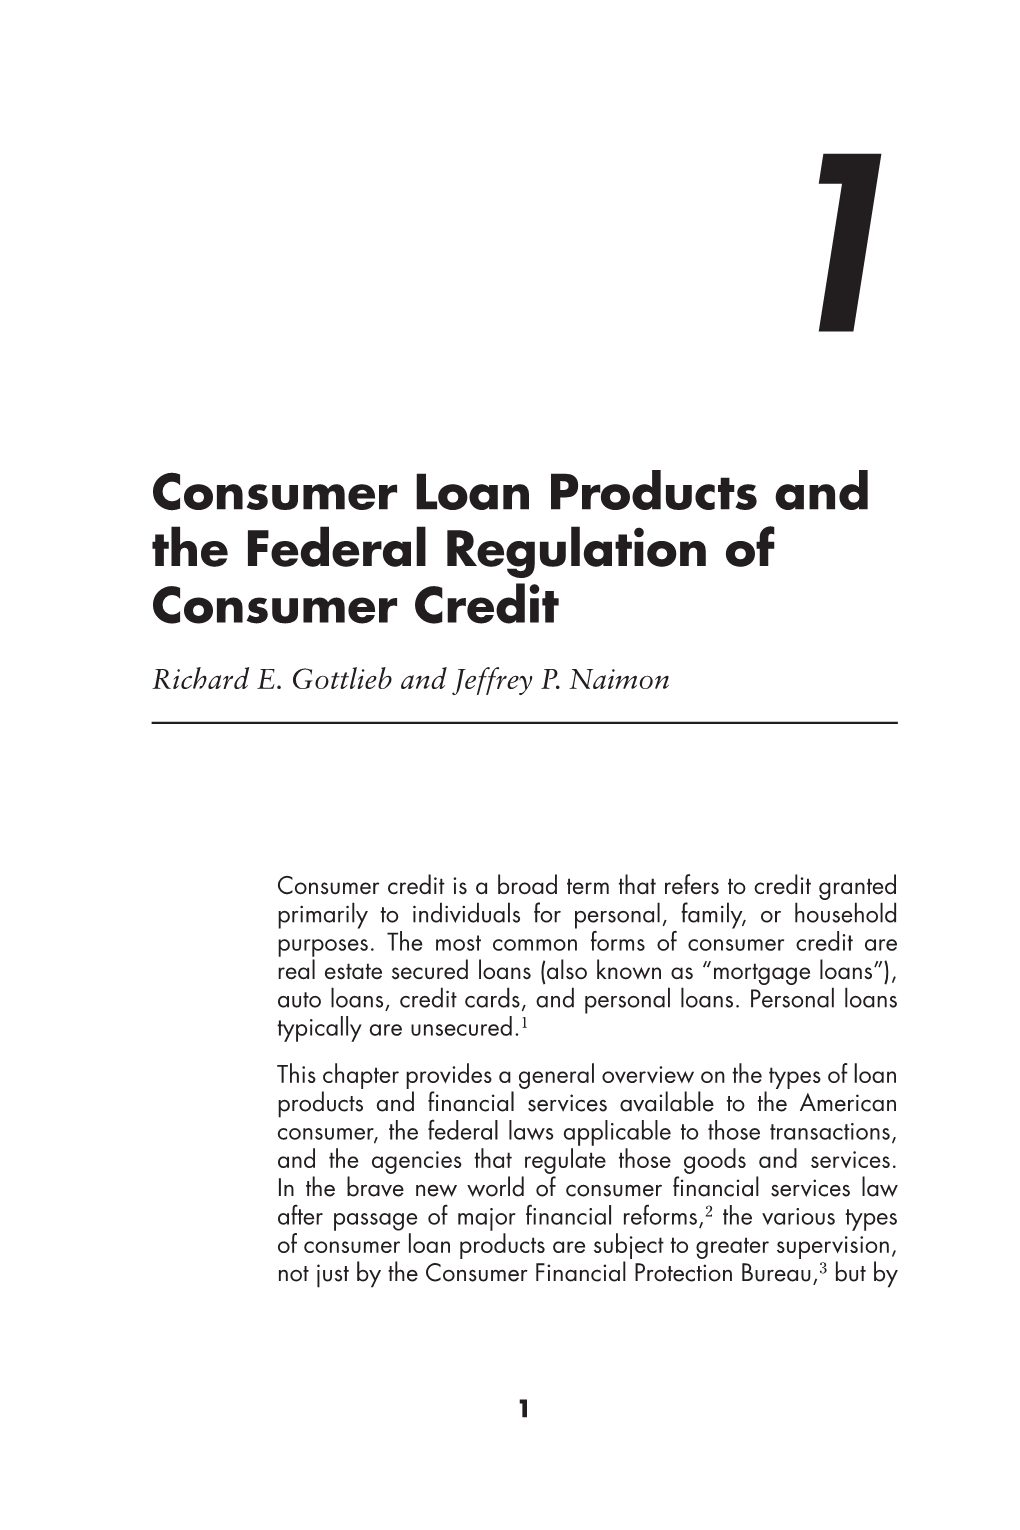 Consumer Loan Products and the Federal Regulation of Consumer Credit